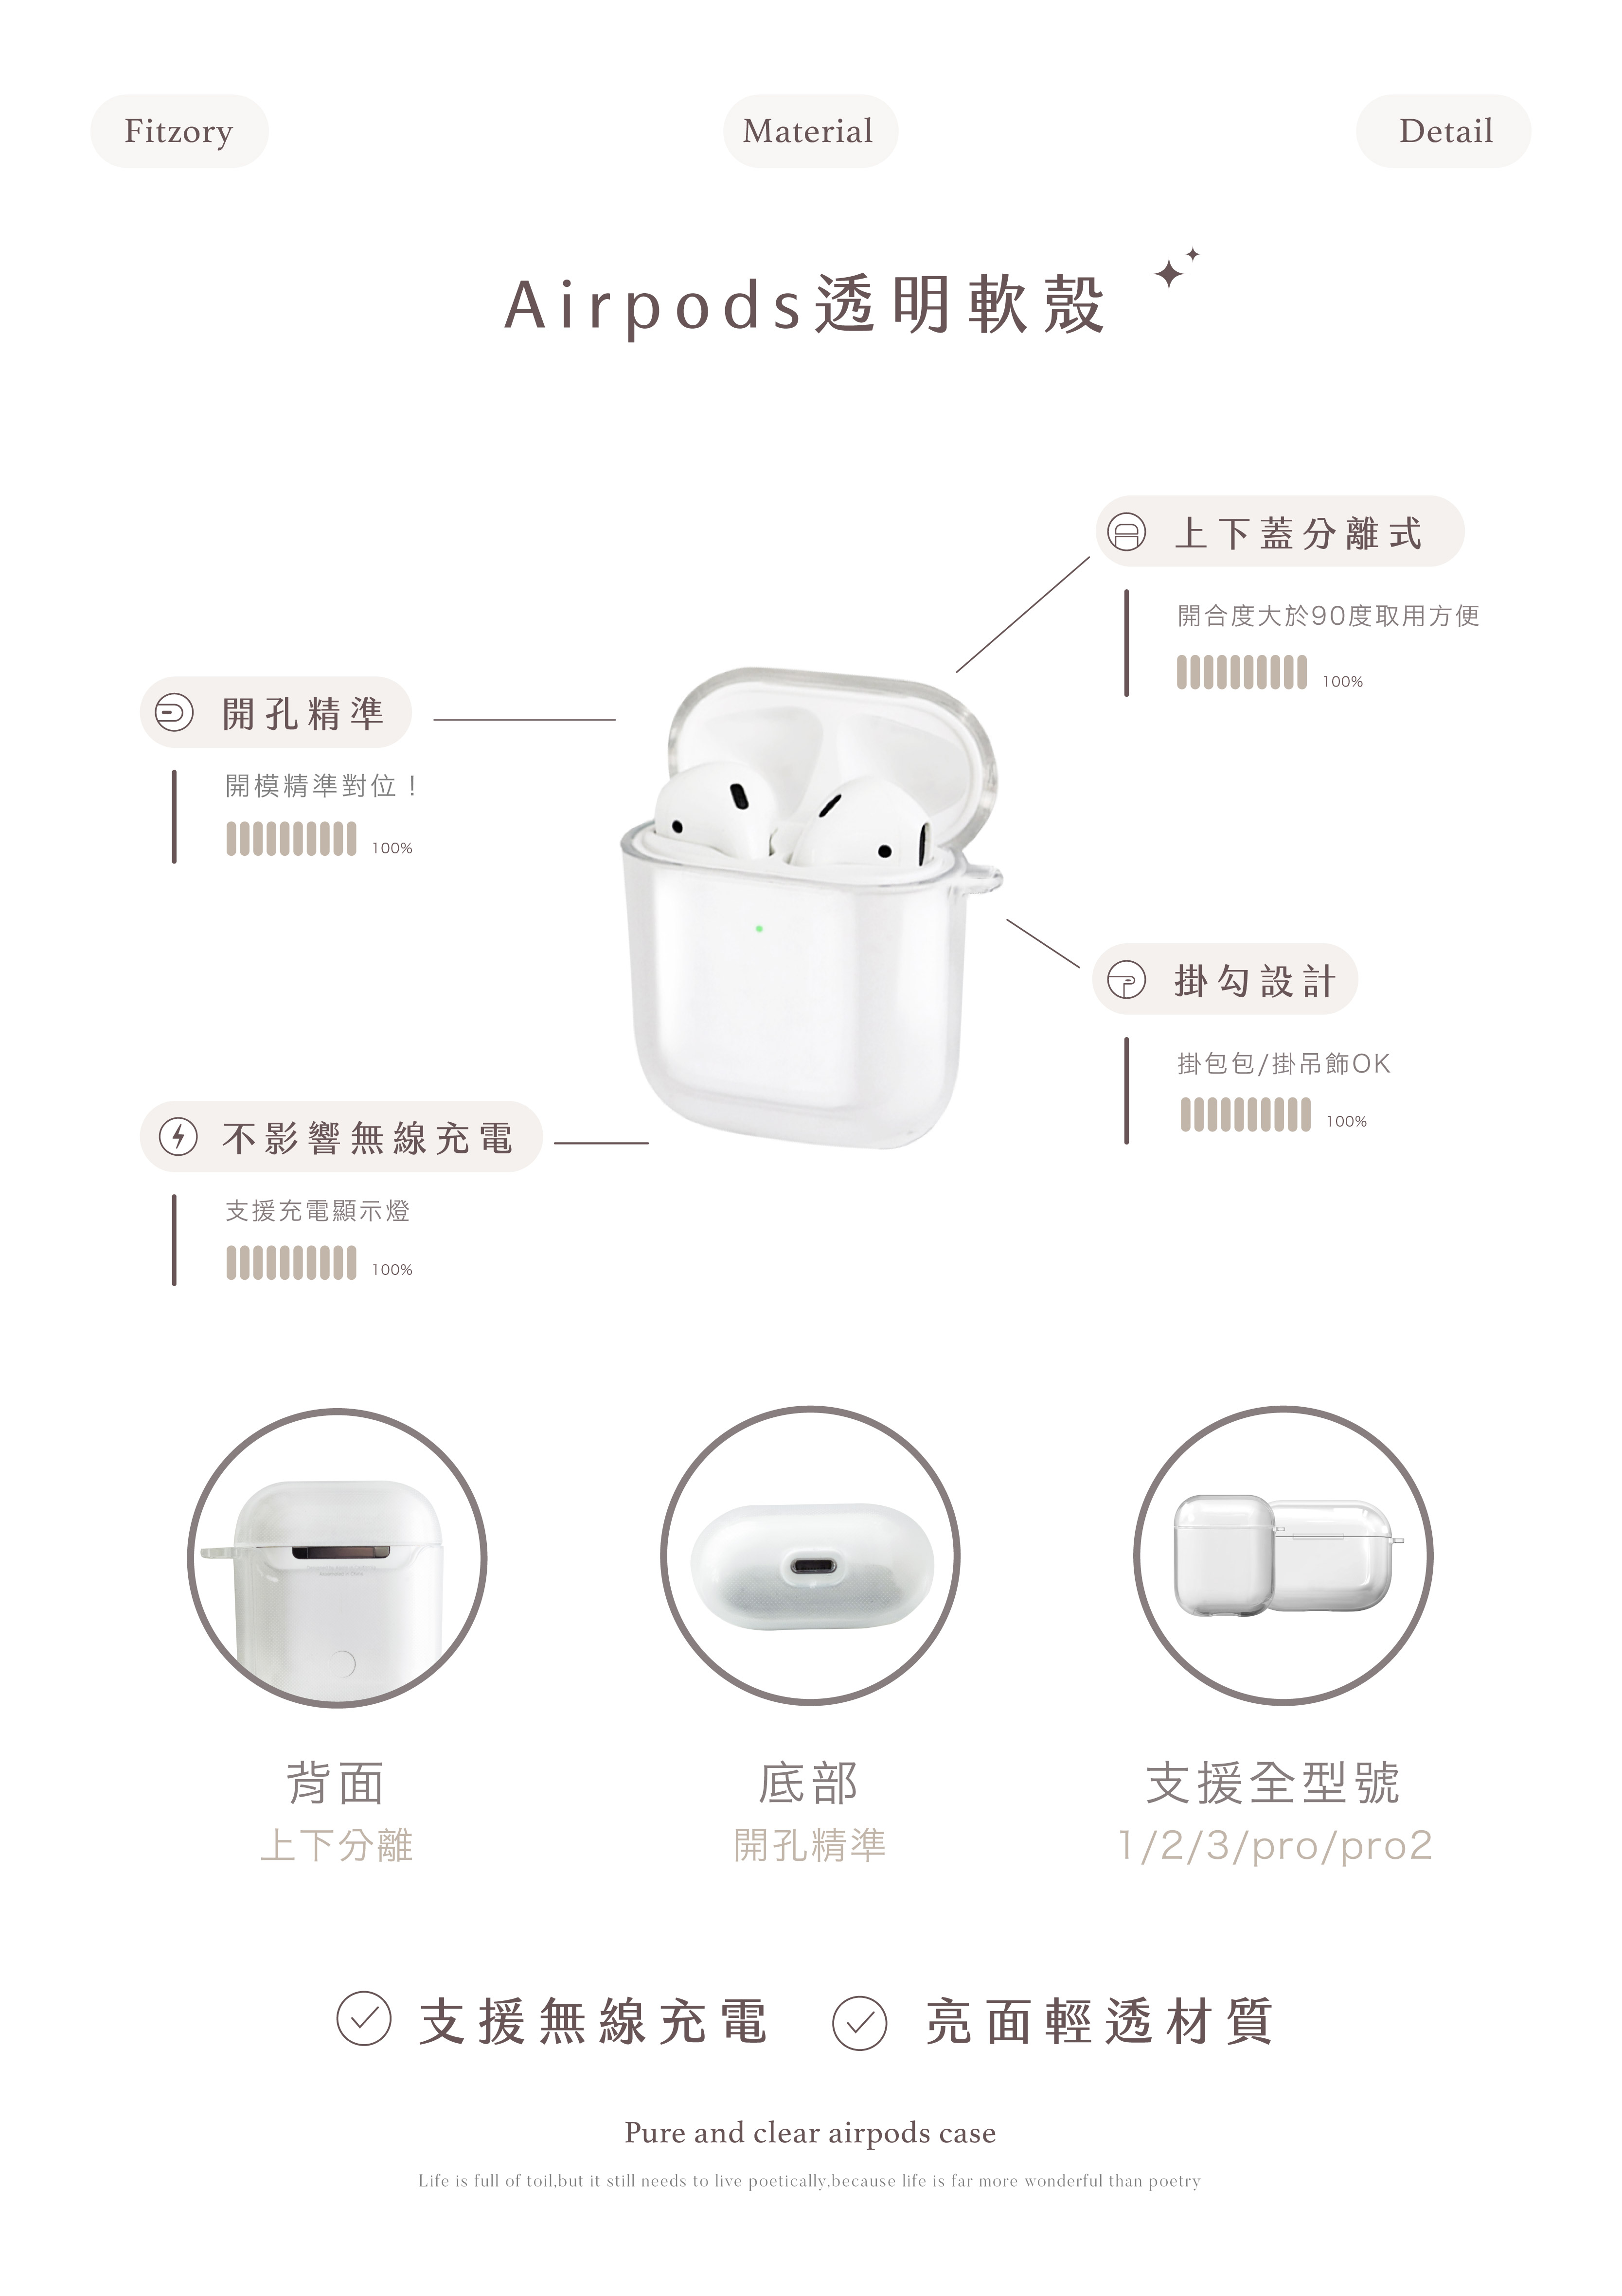 airpods 透明殼.png